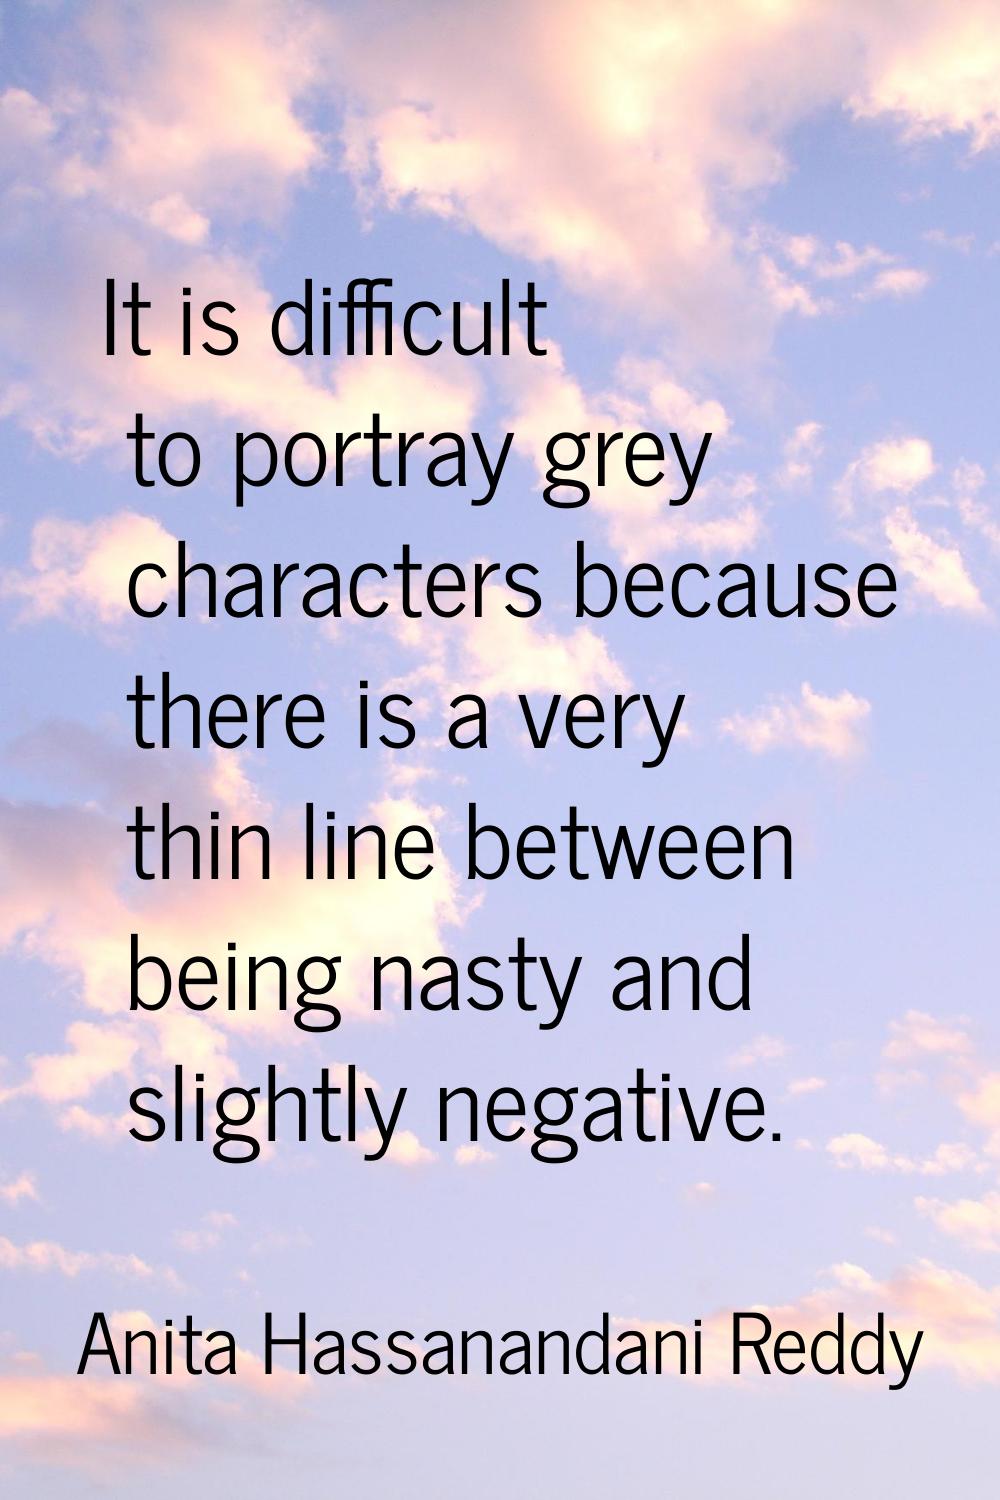 It is difficult to portray grey characters because there is a very thin line between being nasty an